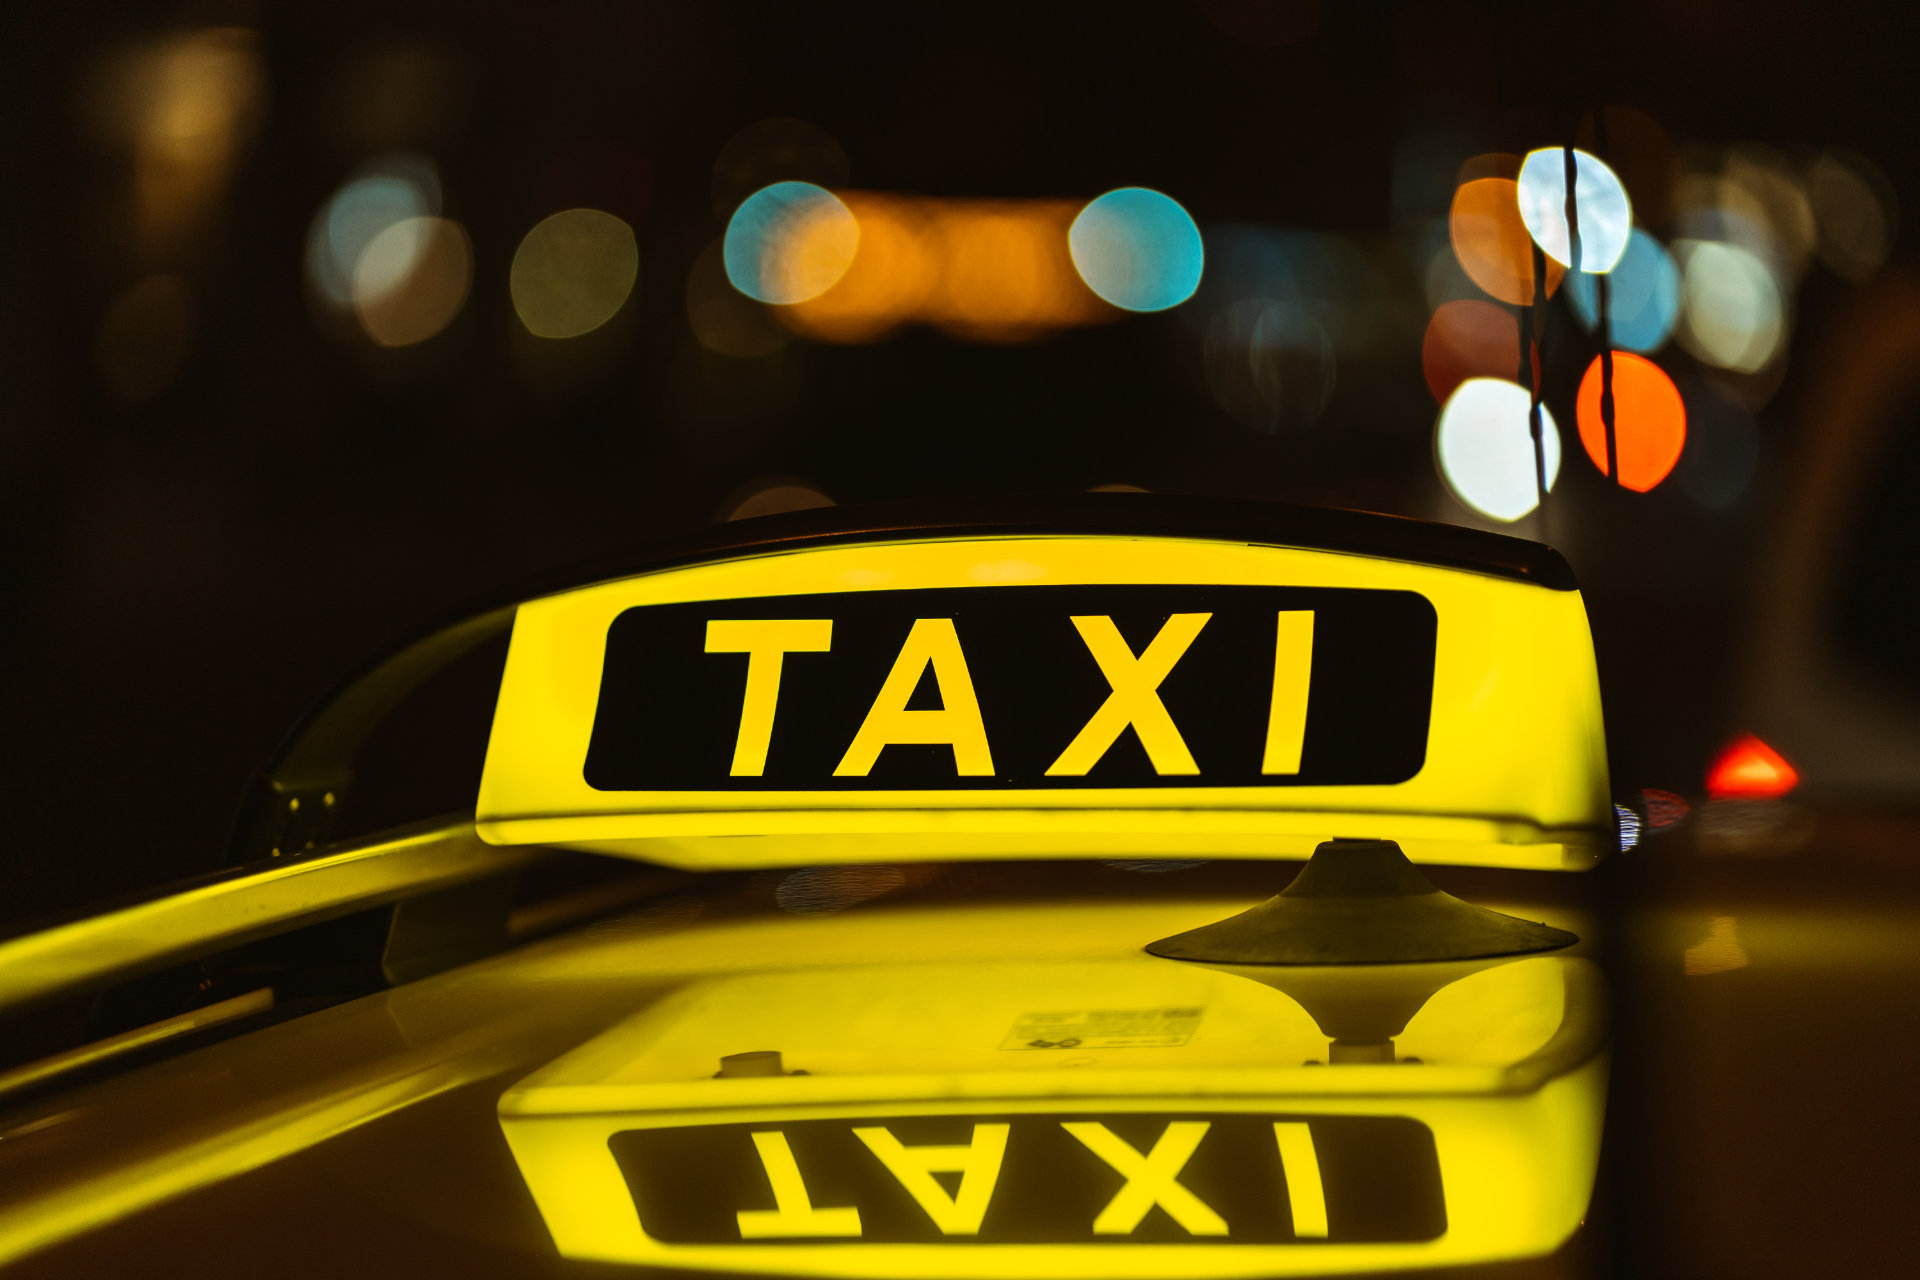 Black and yellow sign of Taxi at night placed on top of a car